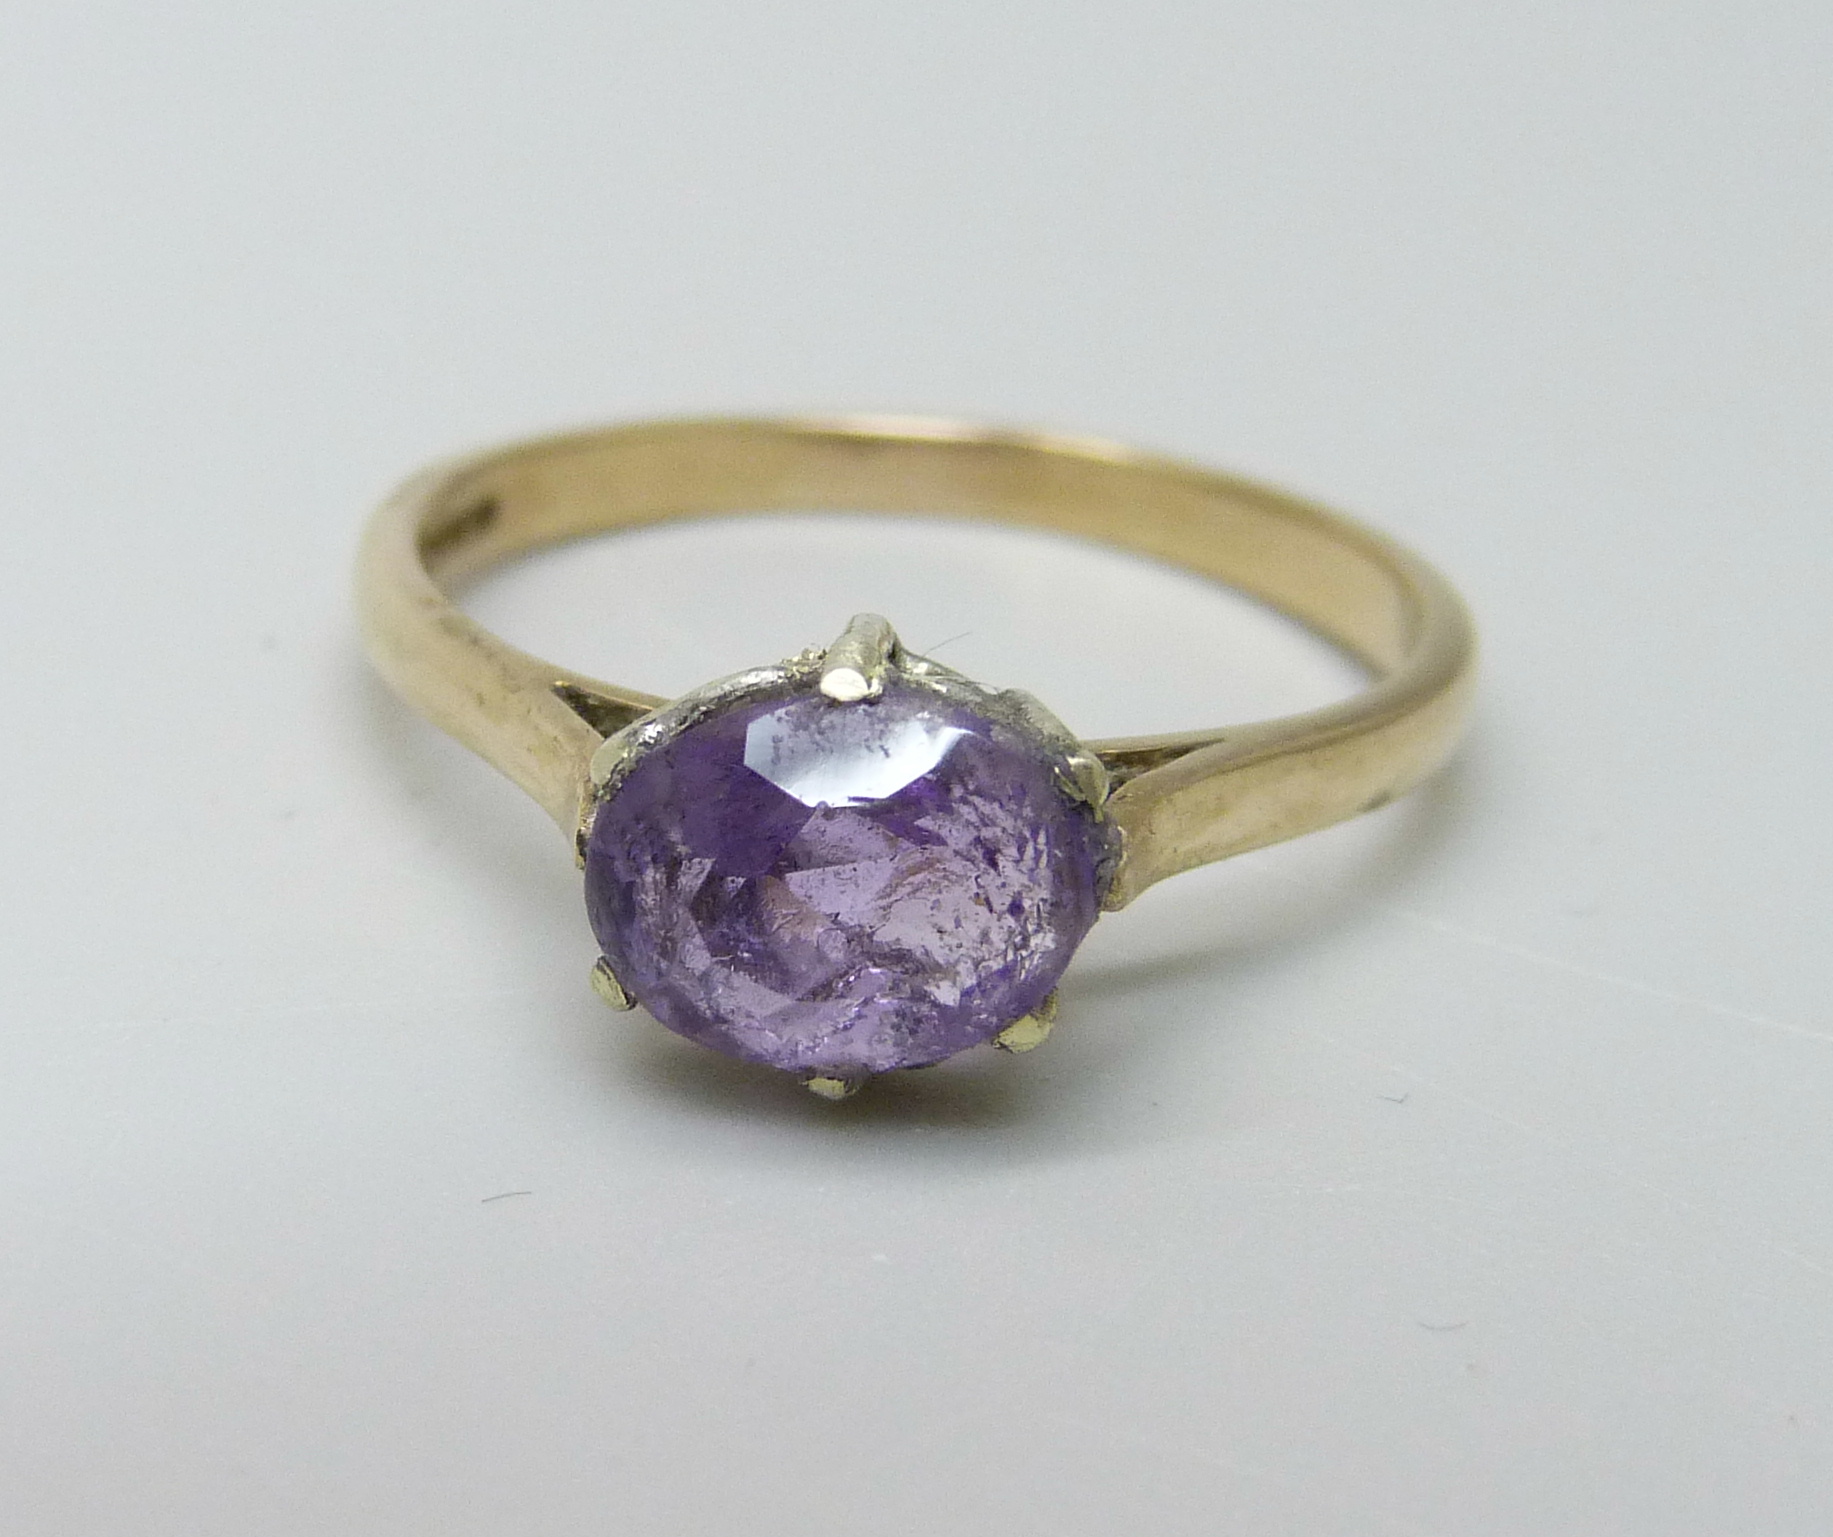 A 9ct gold amethyst solitaire ring, 1.9g, P, a/f